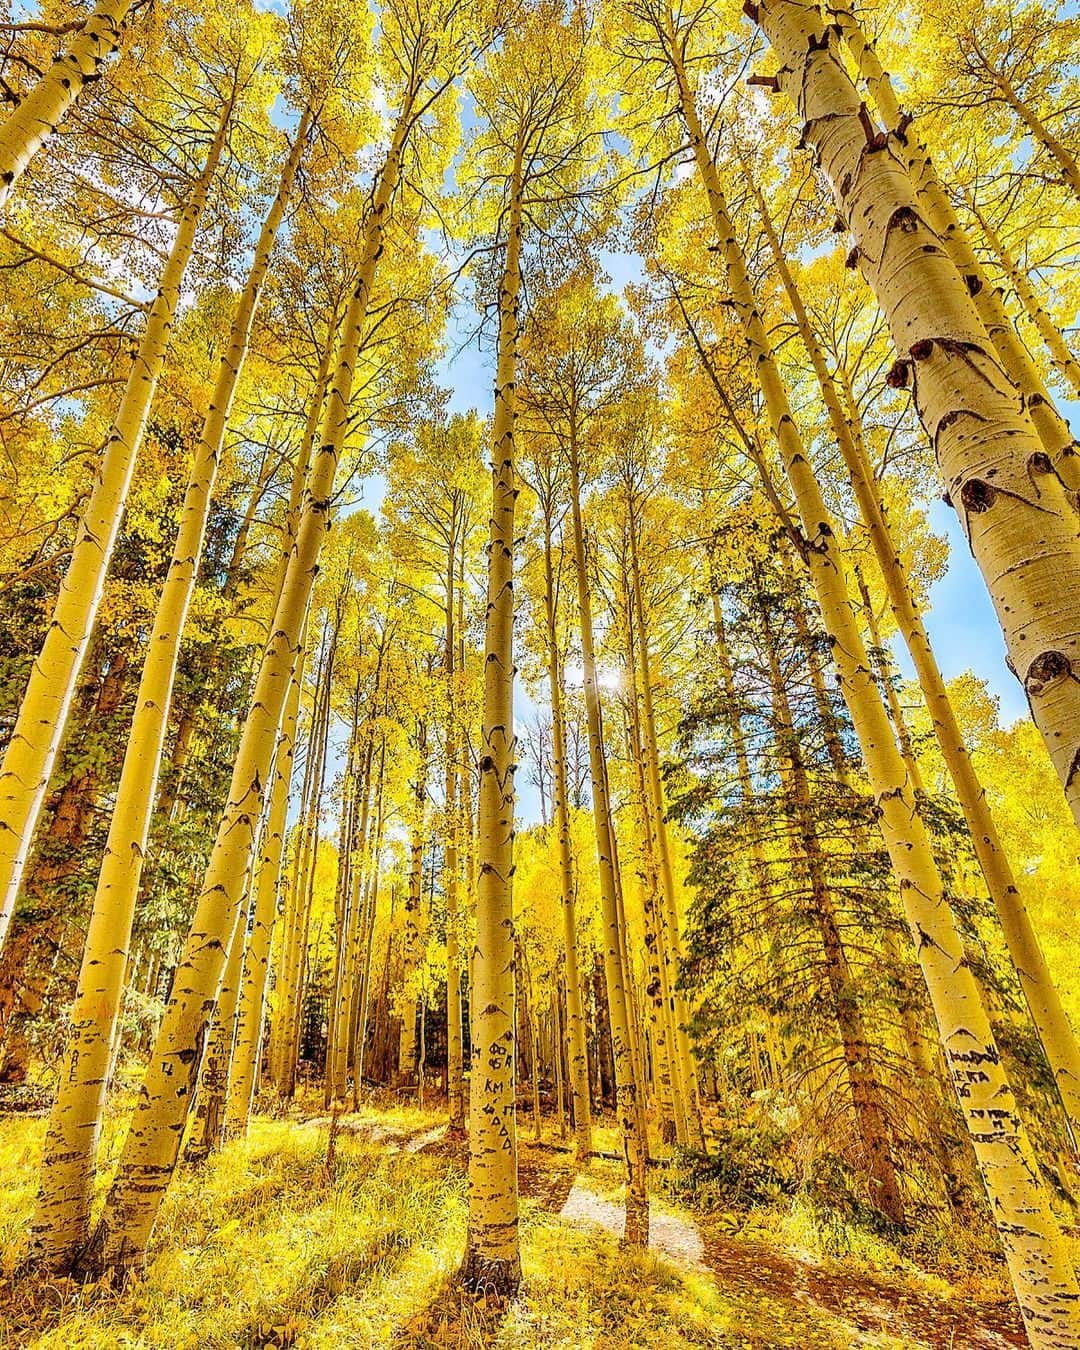 PicLab™ Sayingsのインスタグラム：「Bet you didn't know that you could find fall foliage like this right in Arizona! Snowbowl Ski Resort area near Flagstaff, Arizona has a stunning display of yellow Aspen trees this time of year. Have you ever seen it for yourself?  📸@jochoa15」